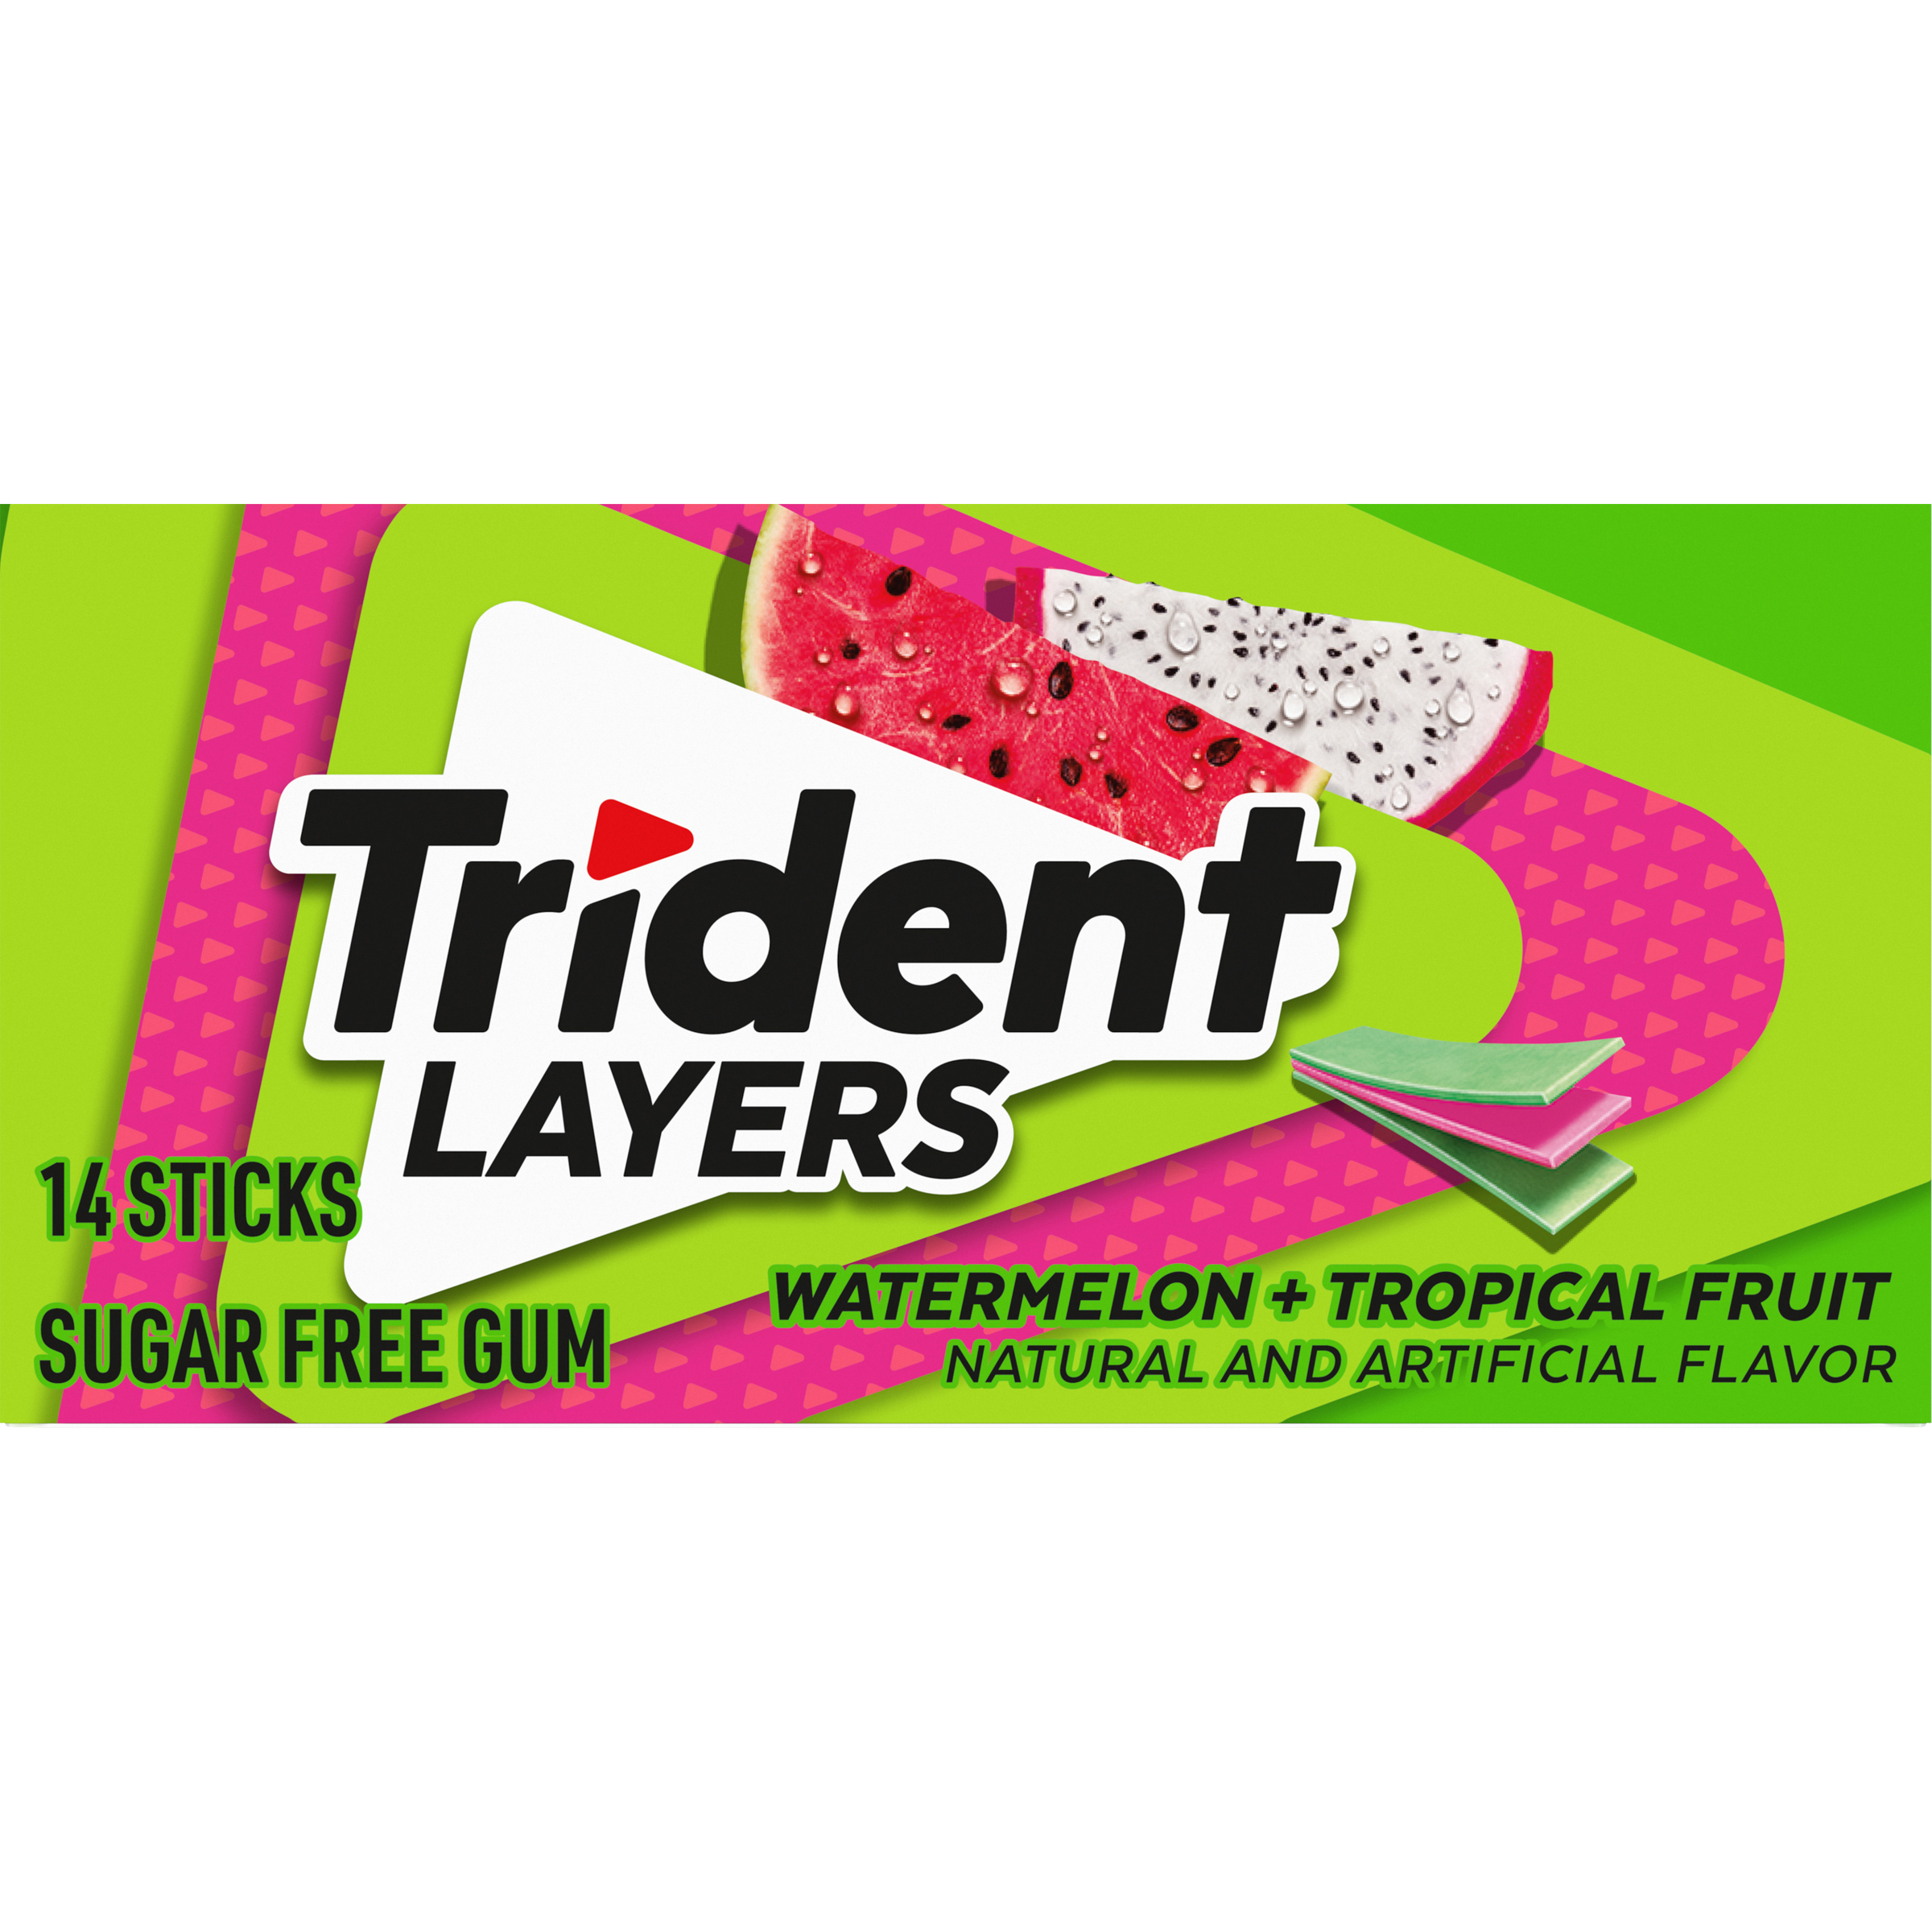 Trident Layers Watermelon + Tropical Fruit (14 pieces)